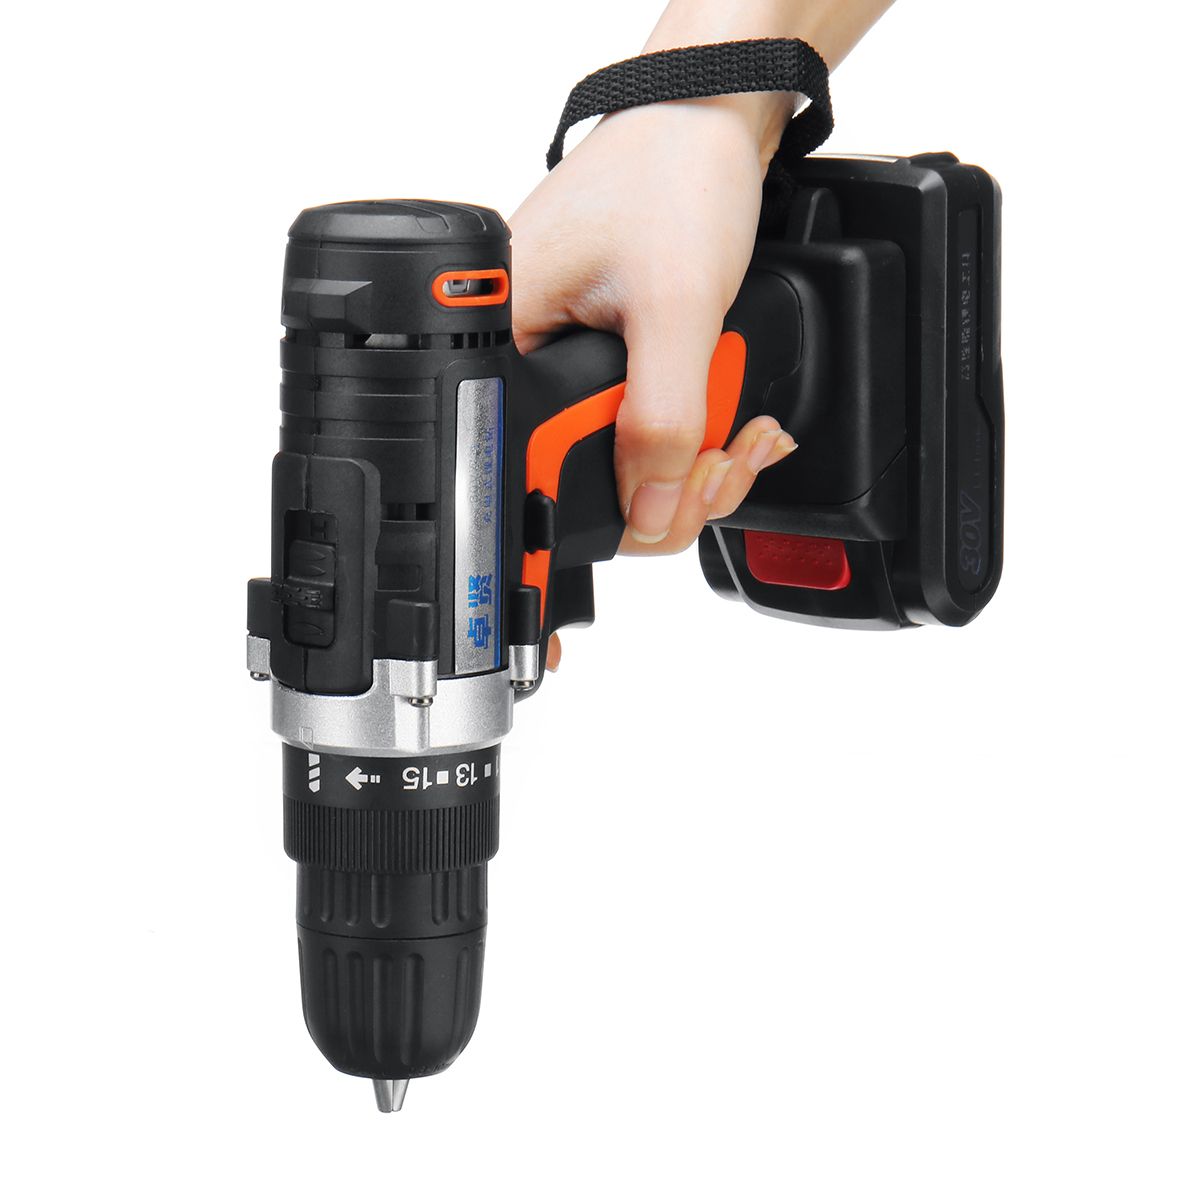 30V-Cordless-Rechargeable-Power-Drill-Driver-Electric-Screwdriver-with-2-Li-ion-Batteries-1393459